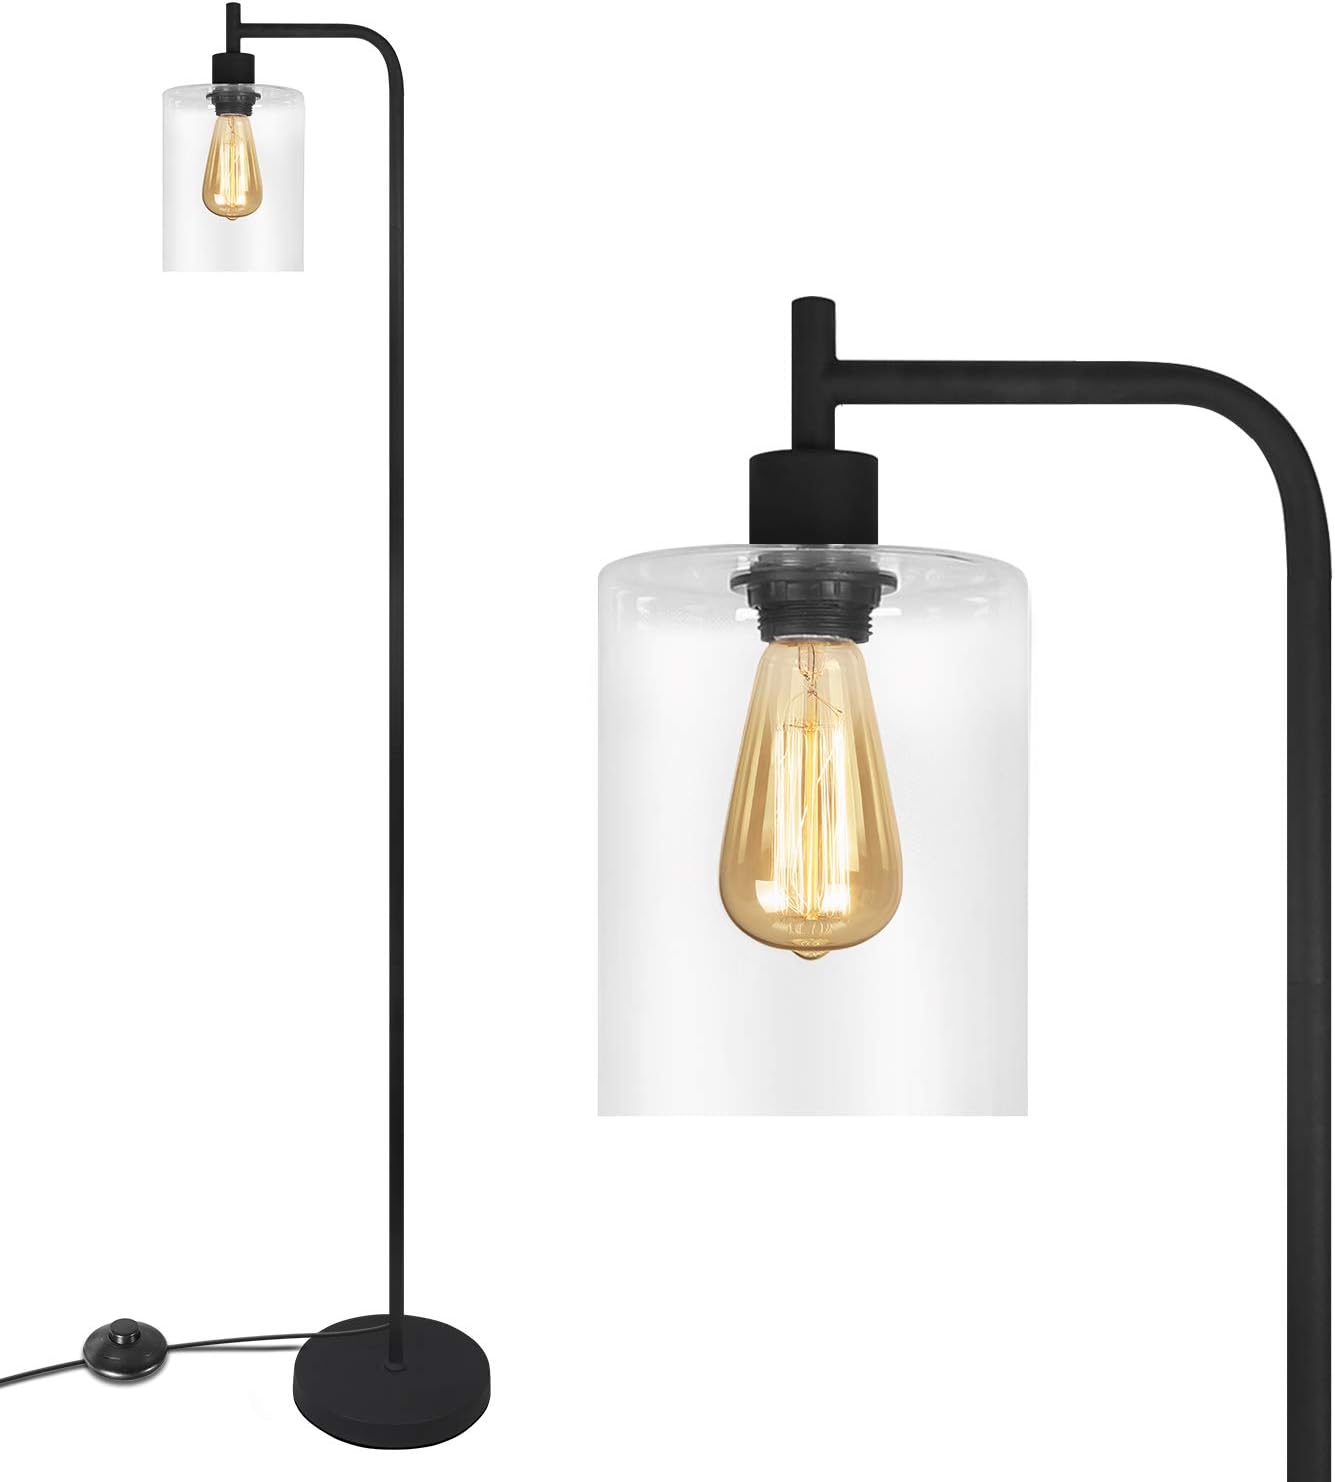 Acaxin Black Industrial Floor Lamp With, Black Industrial Table Lamp Shade